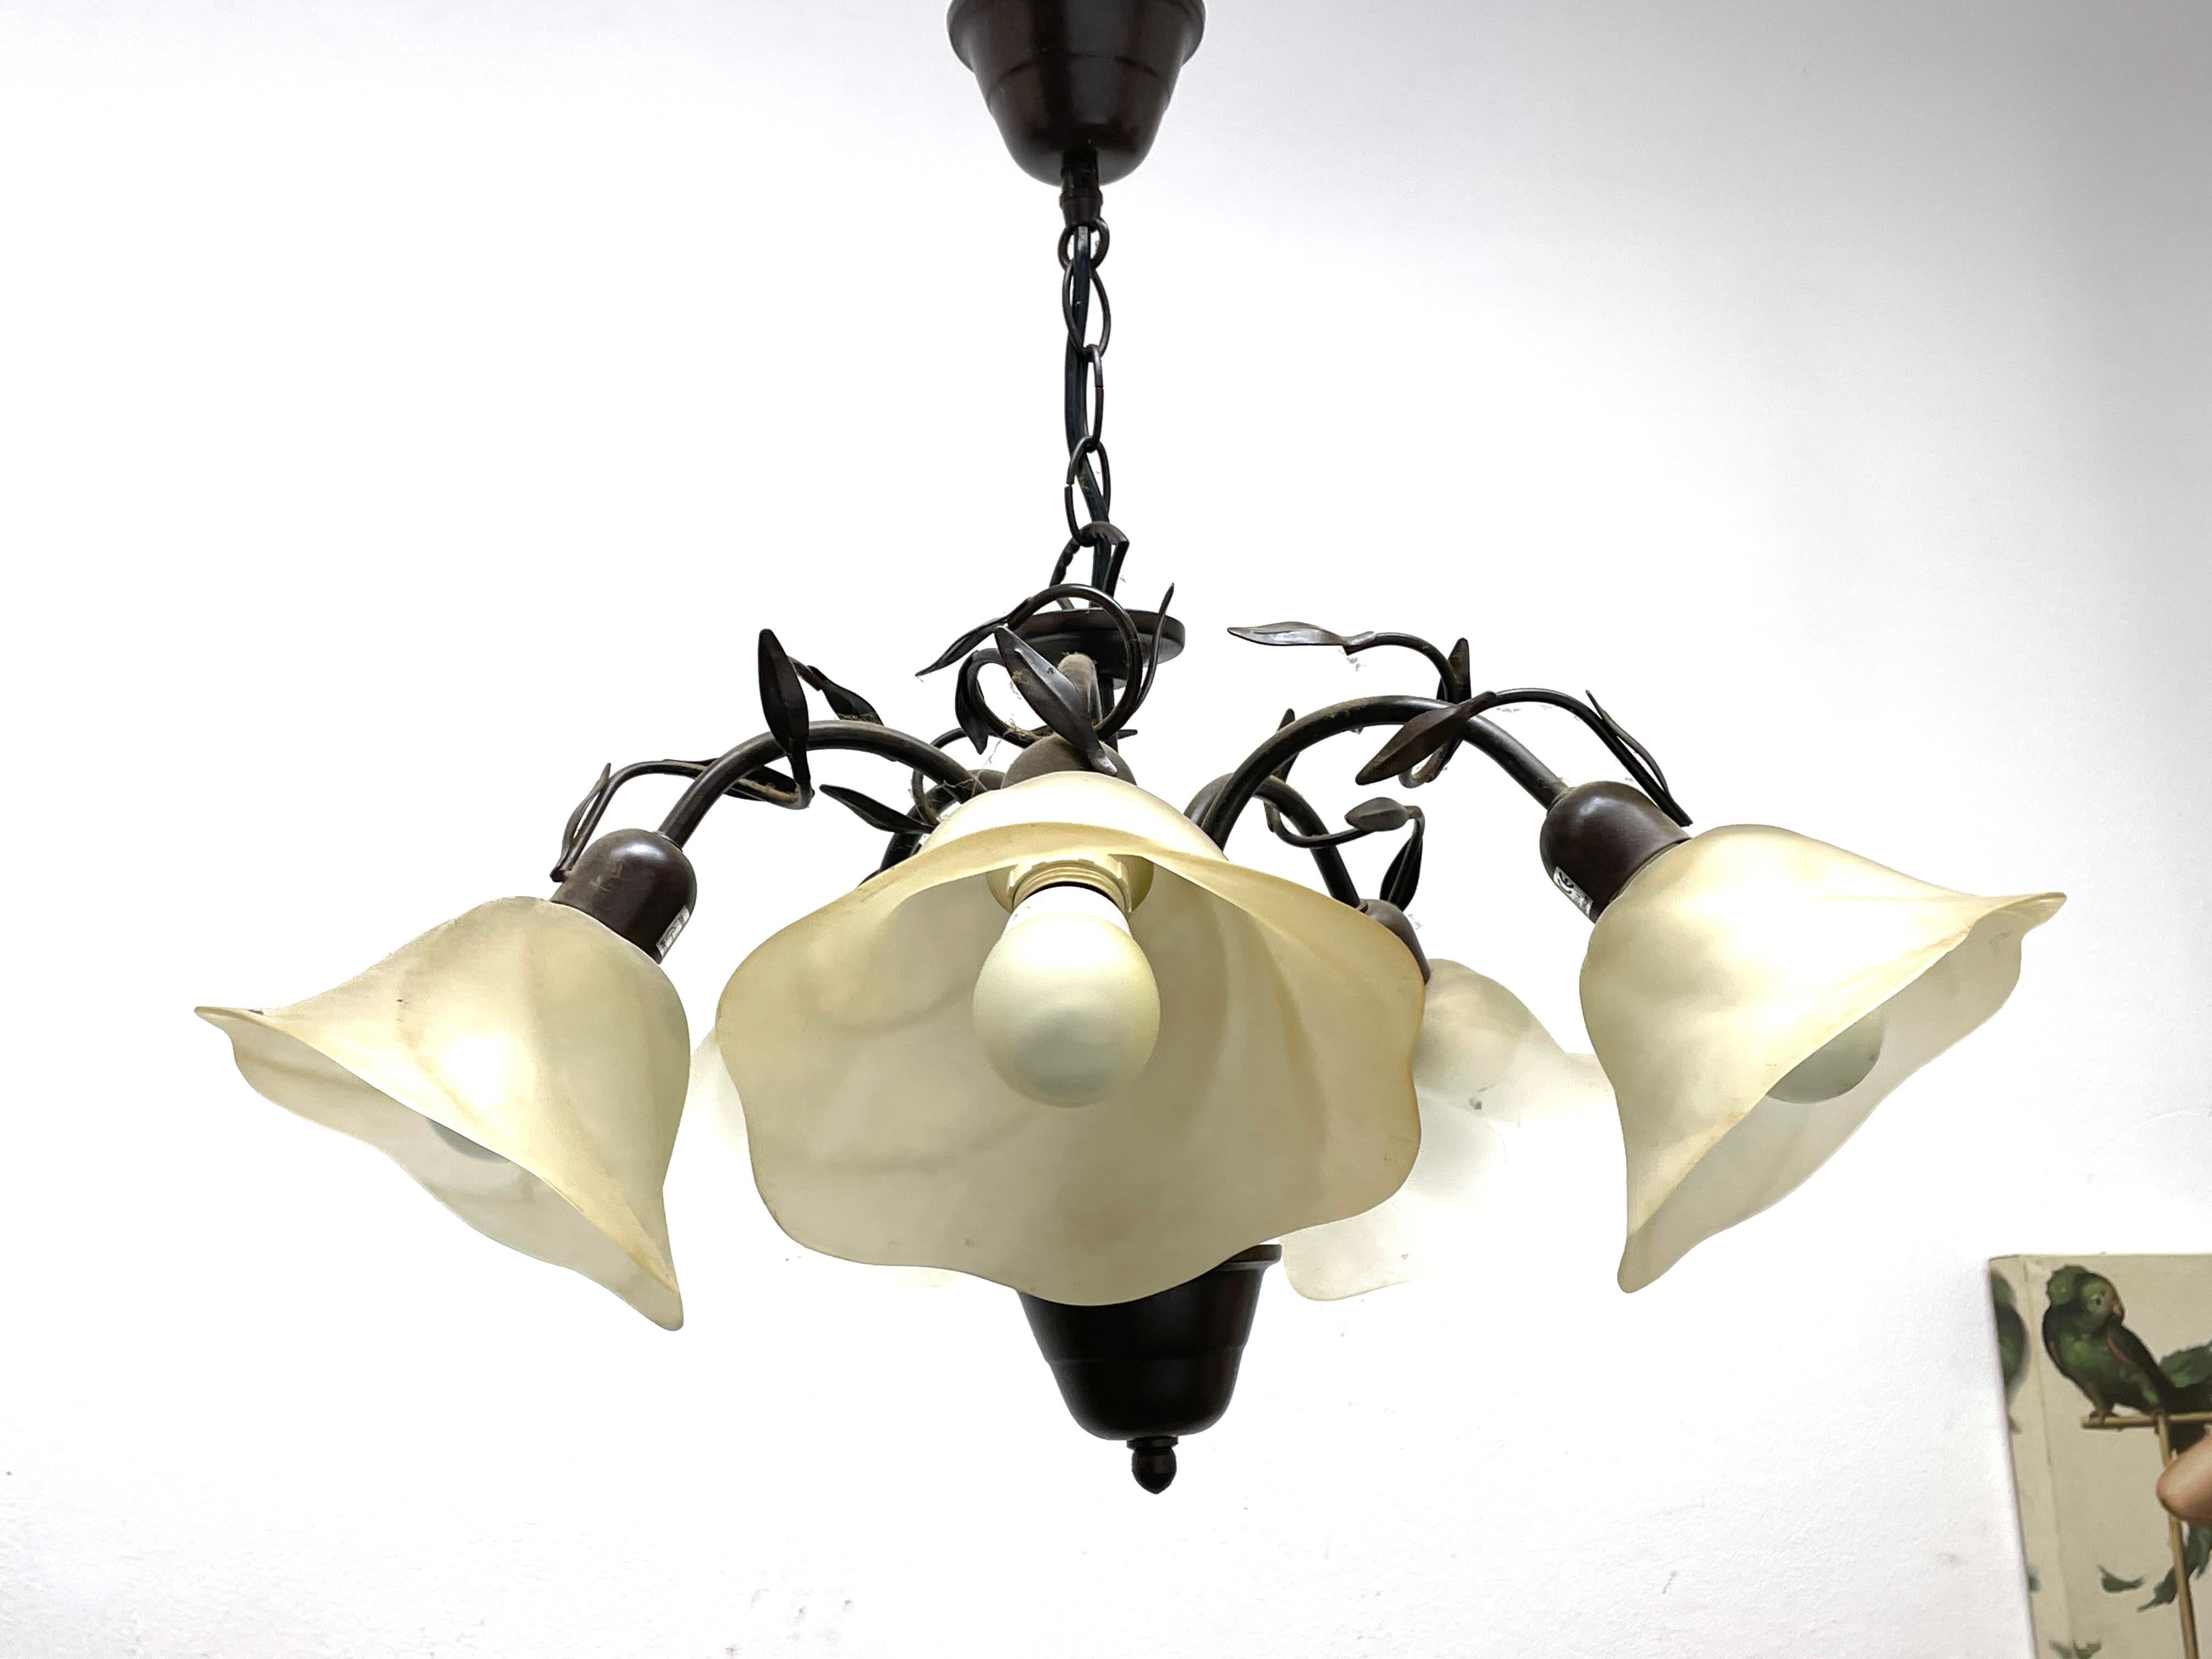 Petite Florentine style five-light chandelier. Functions as is with 5 E14 / 110 Volt light bulbs. Can take up to 40 Watts each bulb. Beautiful colored metal grasses and leaves chandelier with glass shades. It gives a very warm light and represents